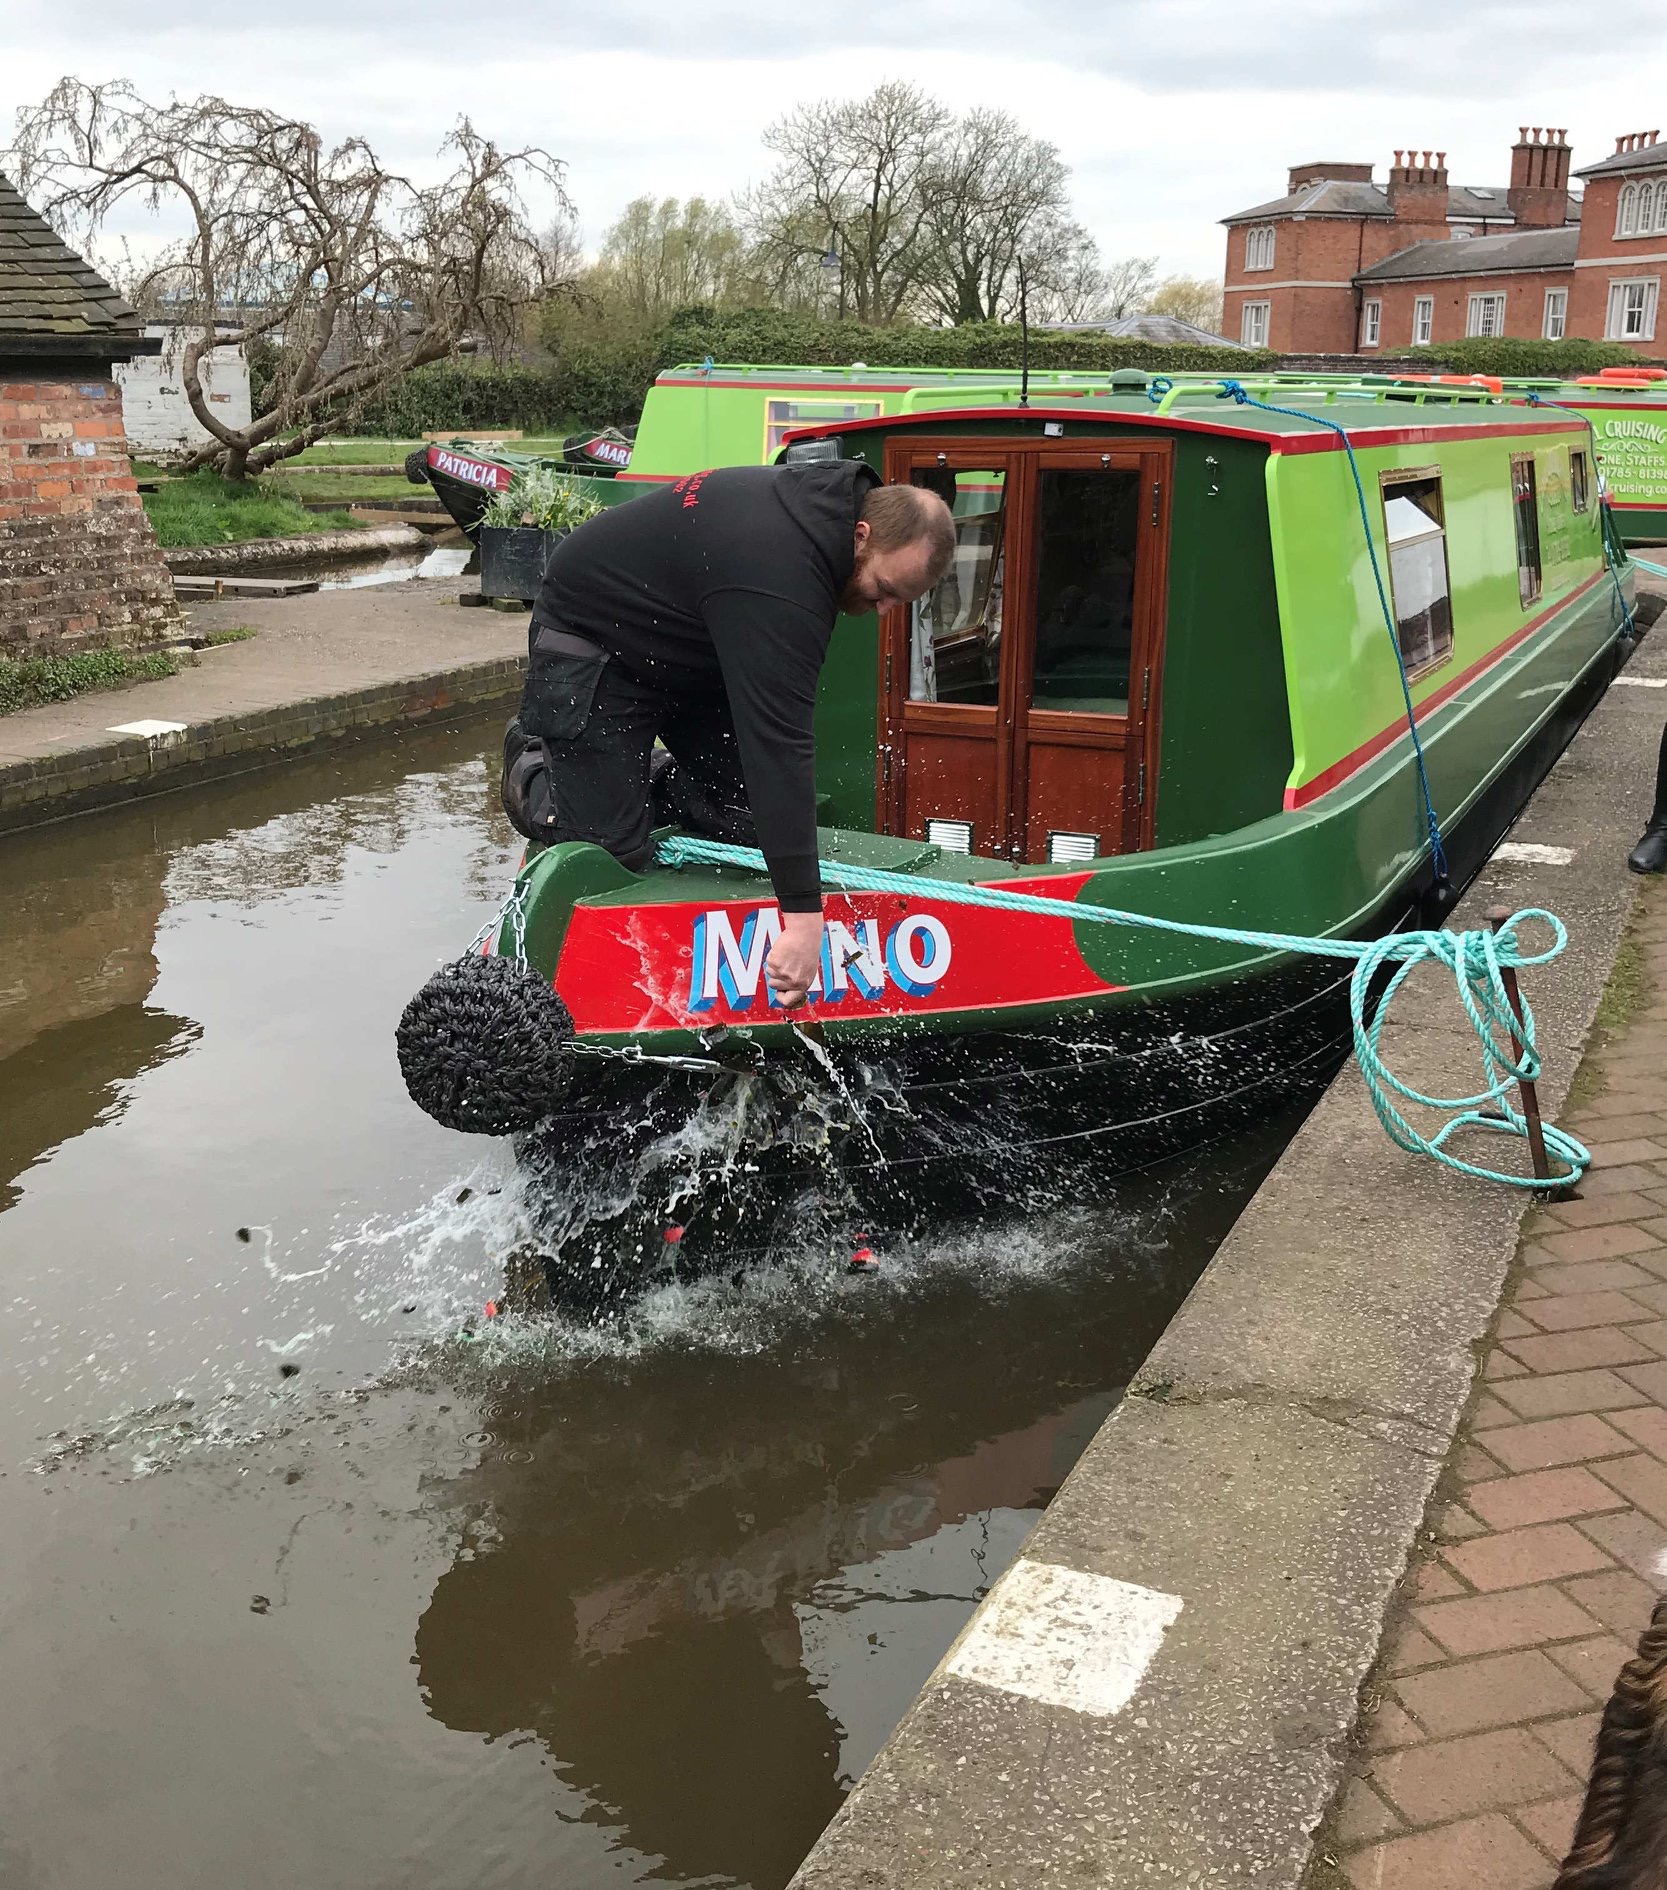 The Mino class canal boat